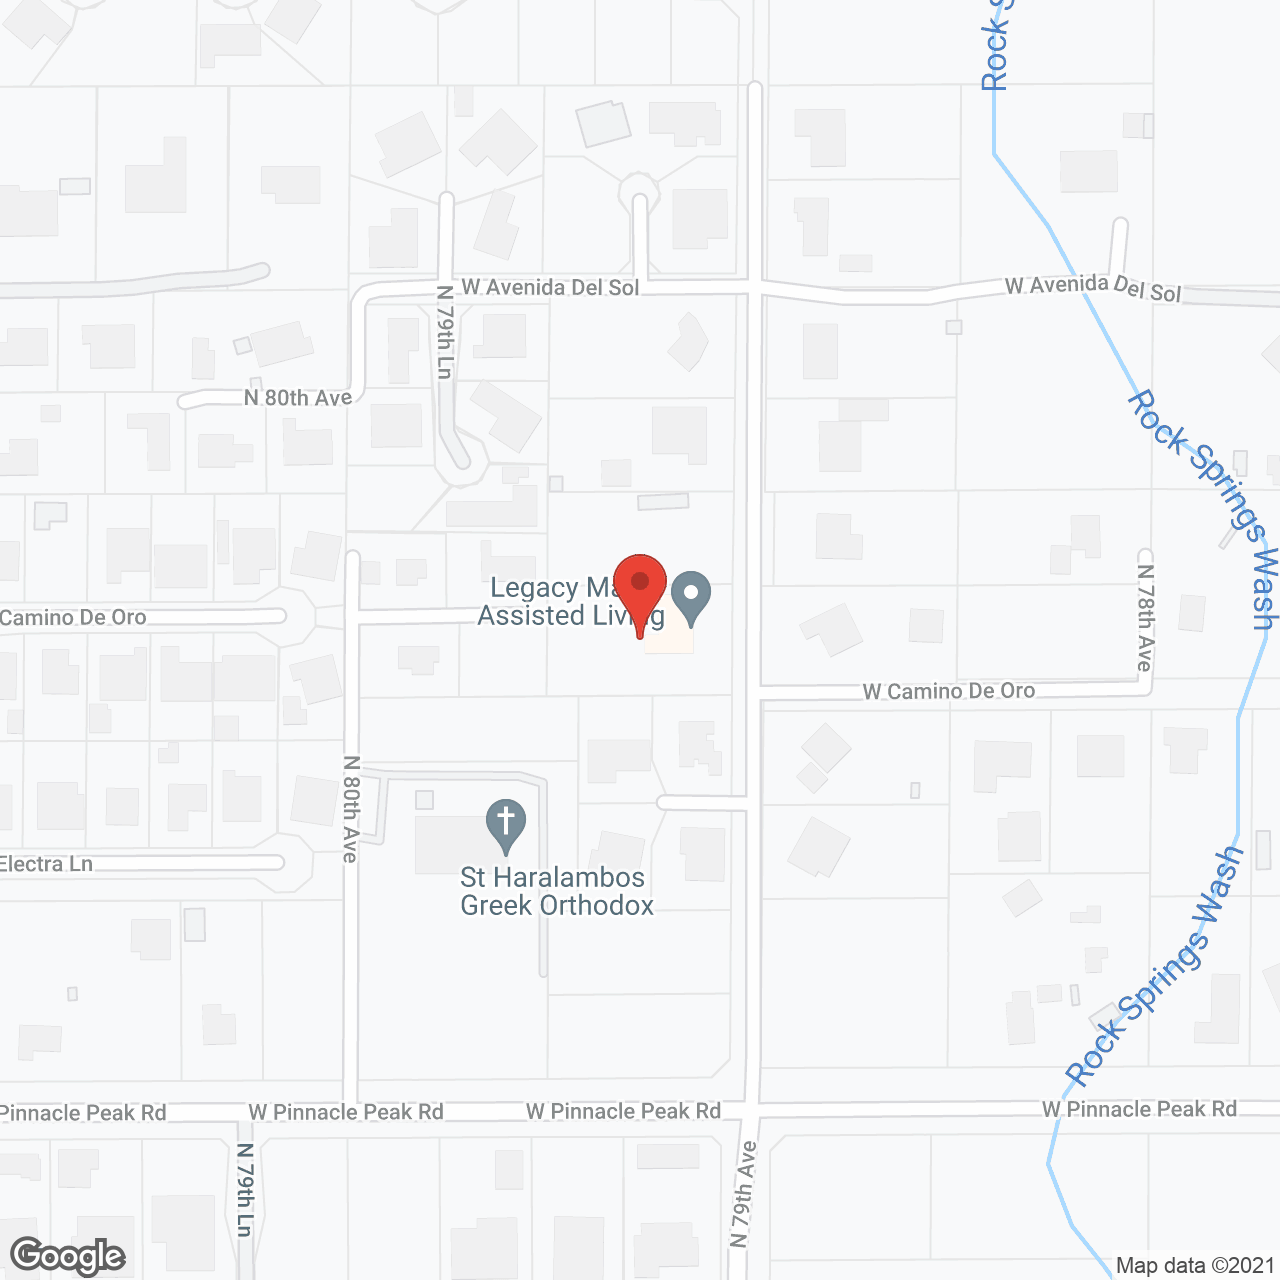 Legacy Manor Assisted Living in google map